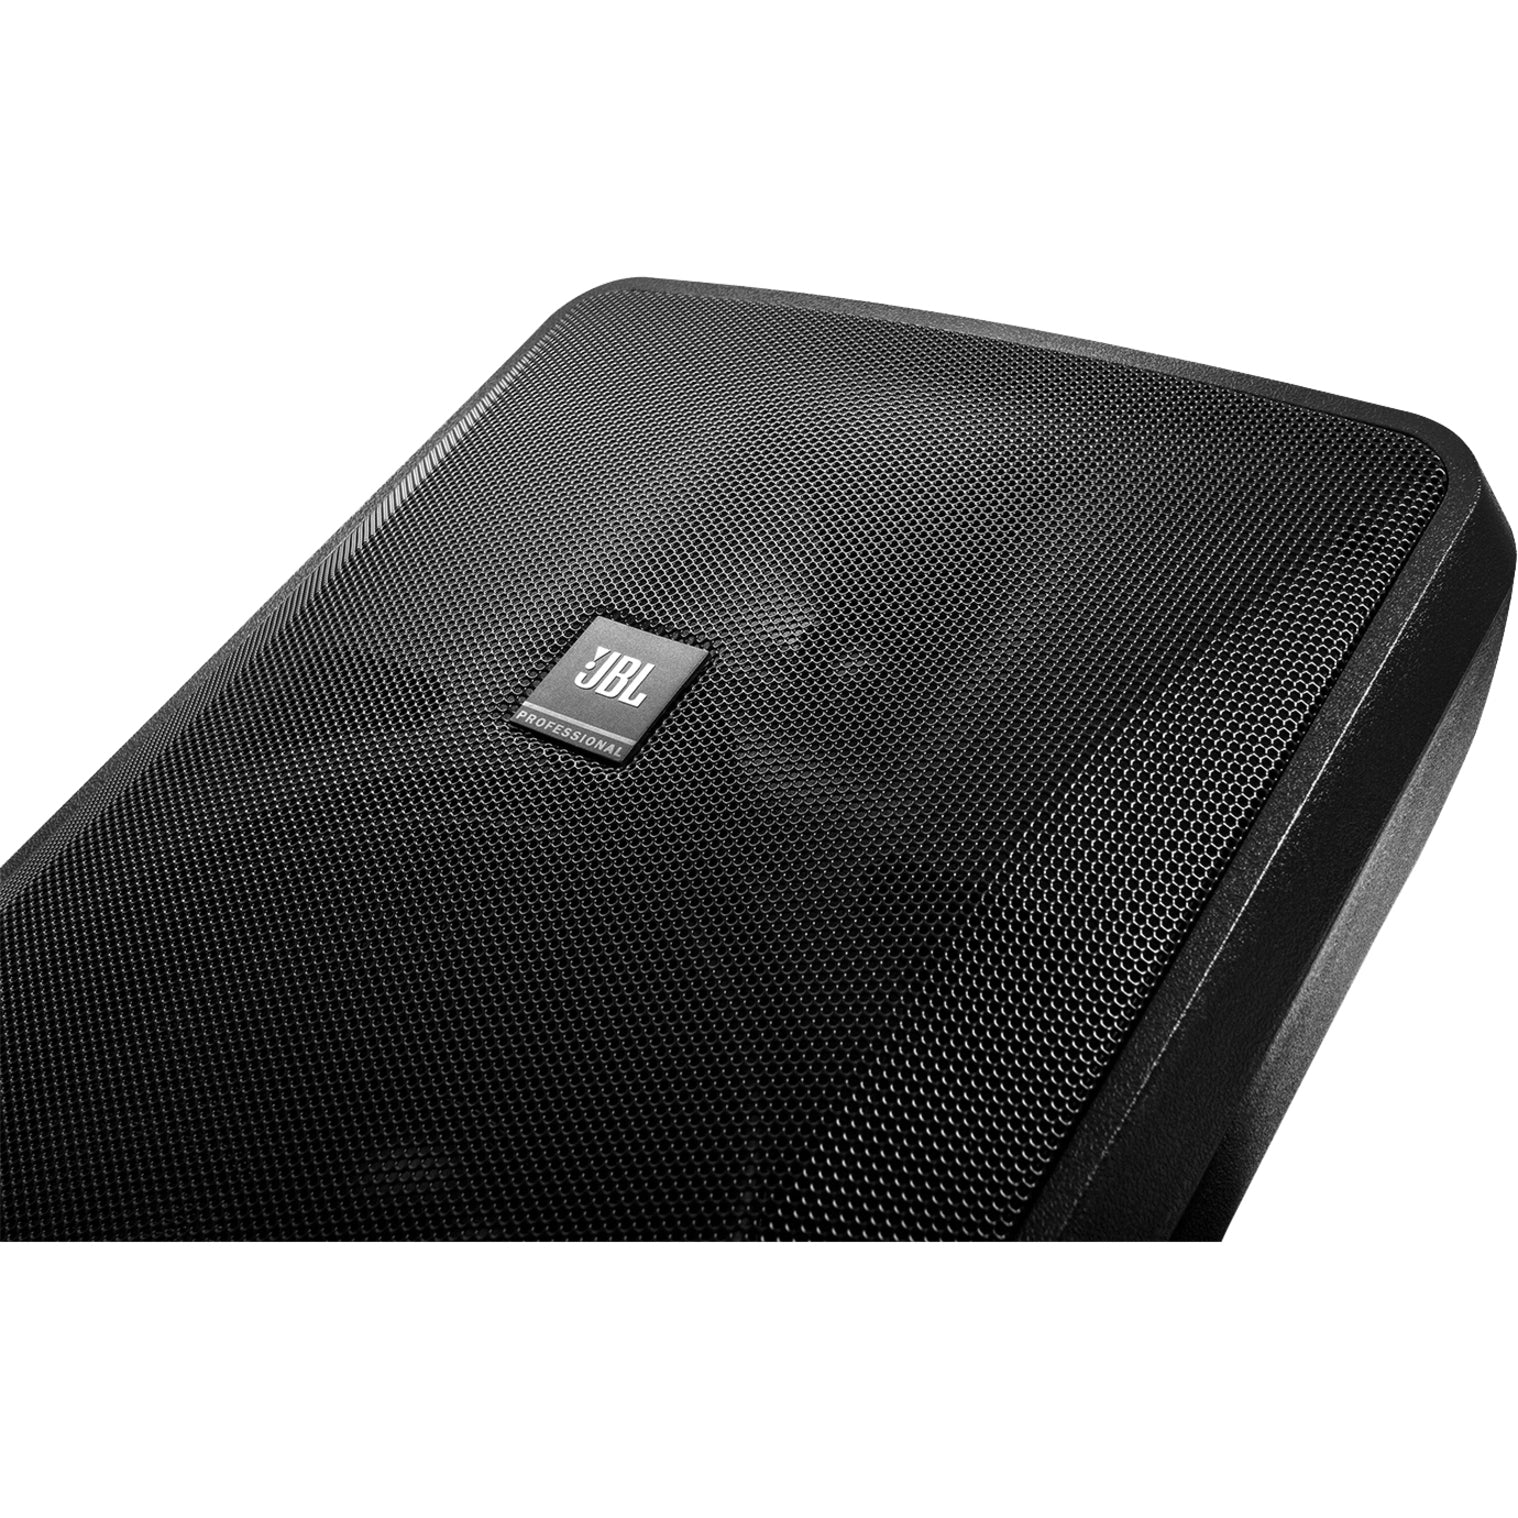 JBL Professional CONTROL 28-1 High Output Indoor/Outdoor Background/Foreground Speaker, 8" Two-Way Vented Loudspeaker, Black - Pair